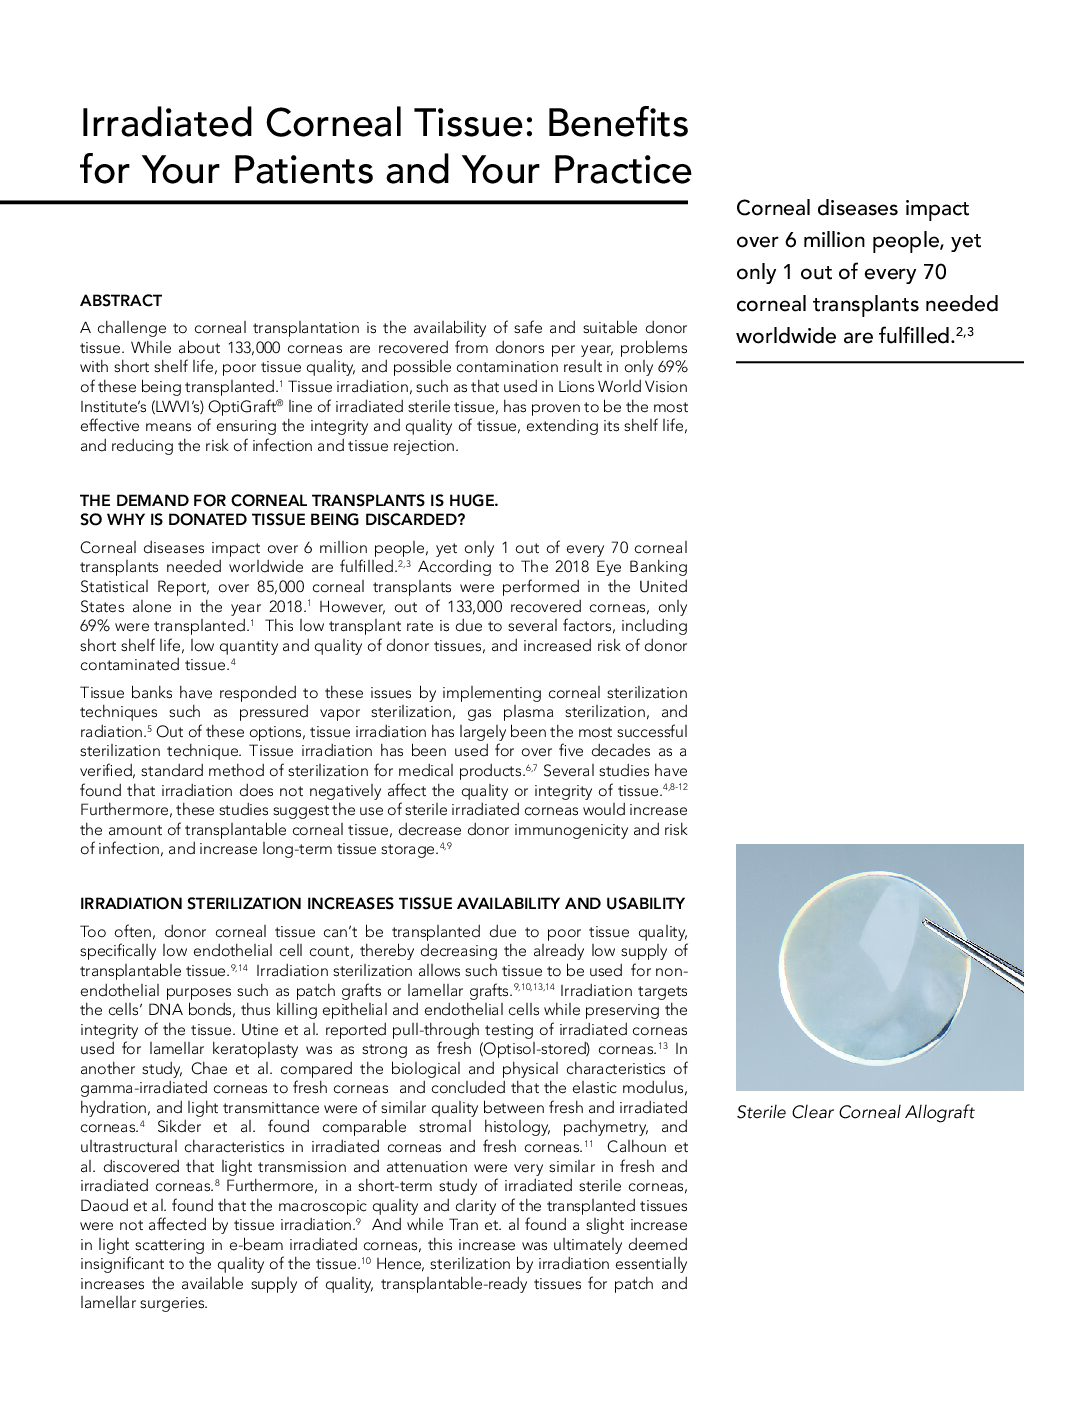 Click to open the Irradiated Corneal Tissue: Benefits for Your Patients and Your Practice file